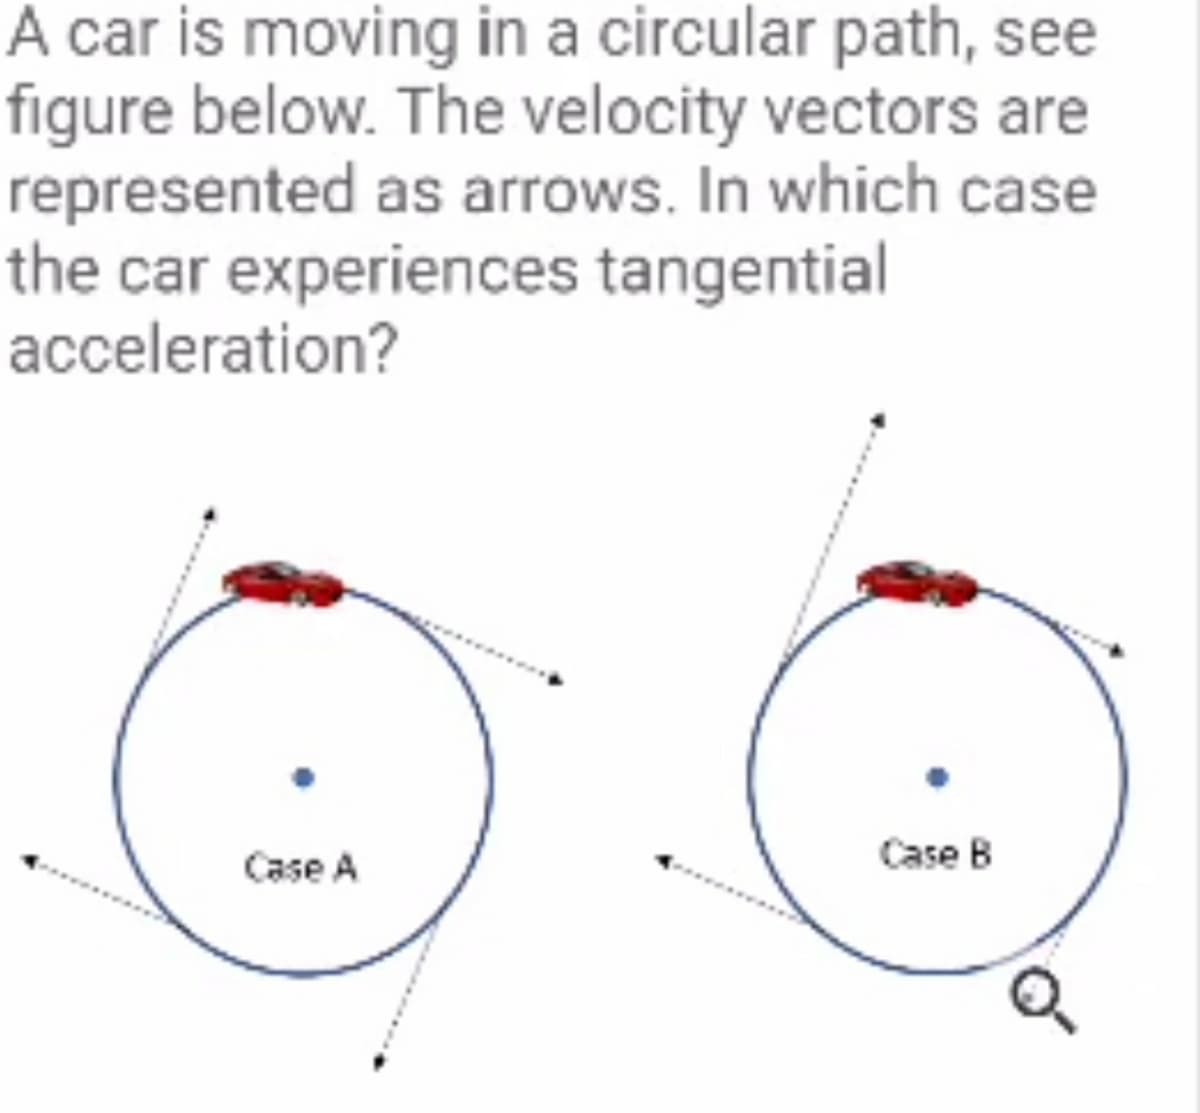 A car is moving in a circular path, see
figure below. The velocity vectors are
represented as arrows. In which case
the car experiences tangential
acceleration?
Case A
Case B
